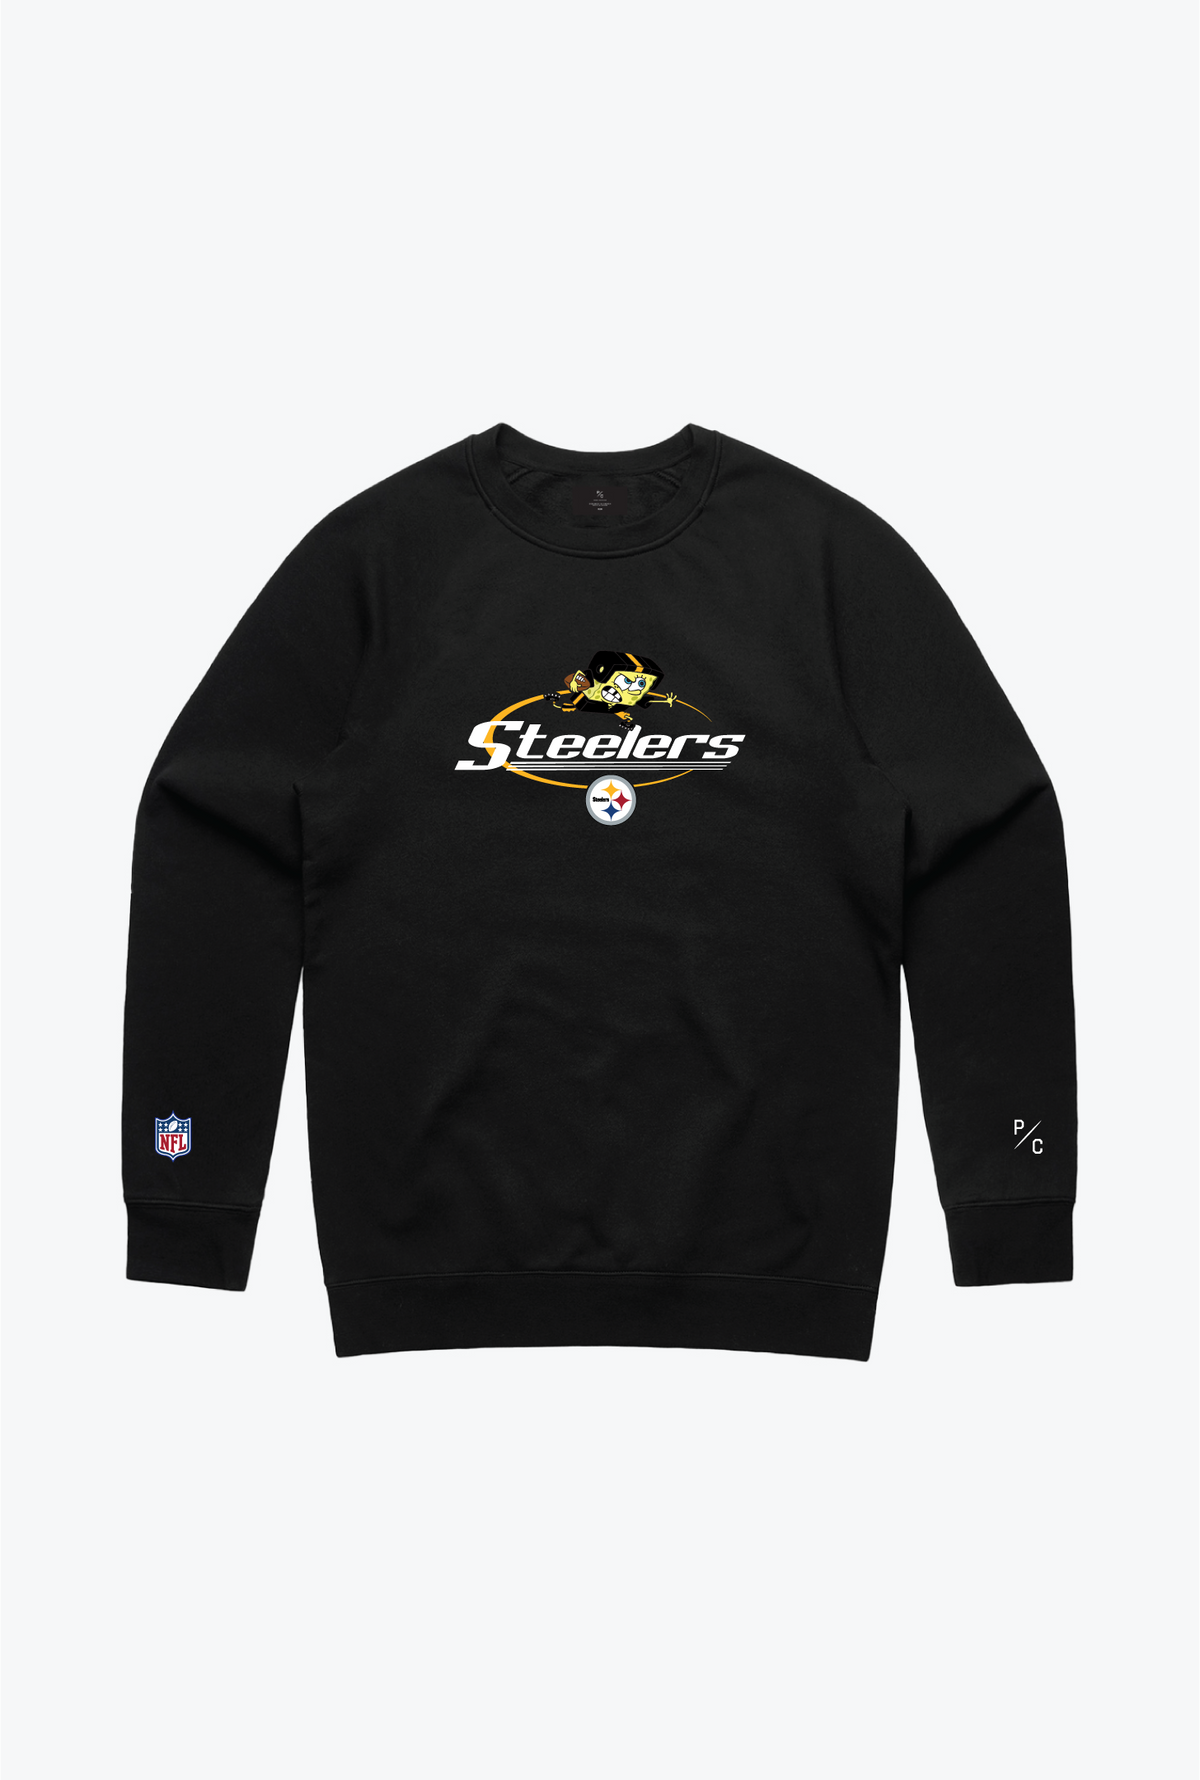 NFL x Nickelodeon Embroidered Crewneck - Pittsburgh Steelers